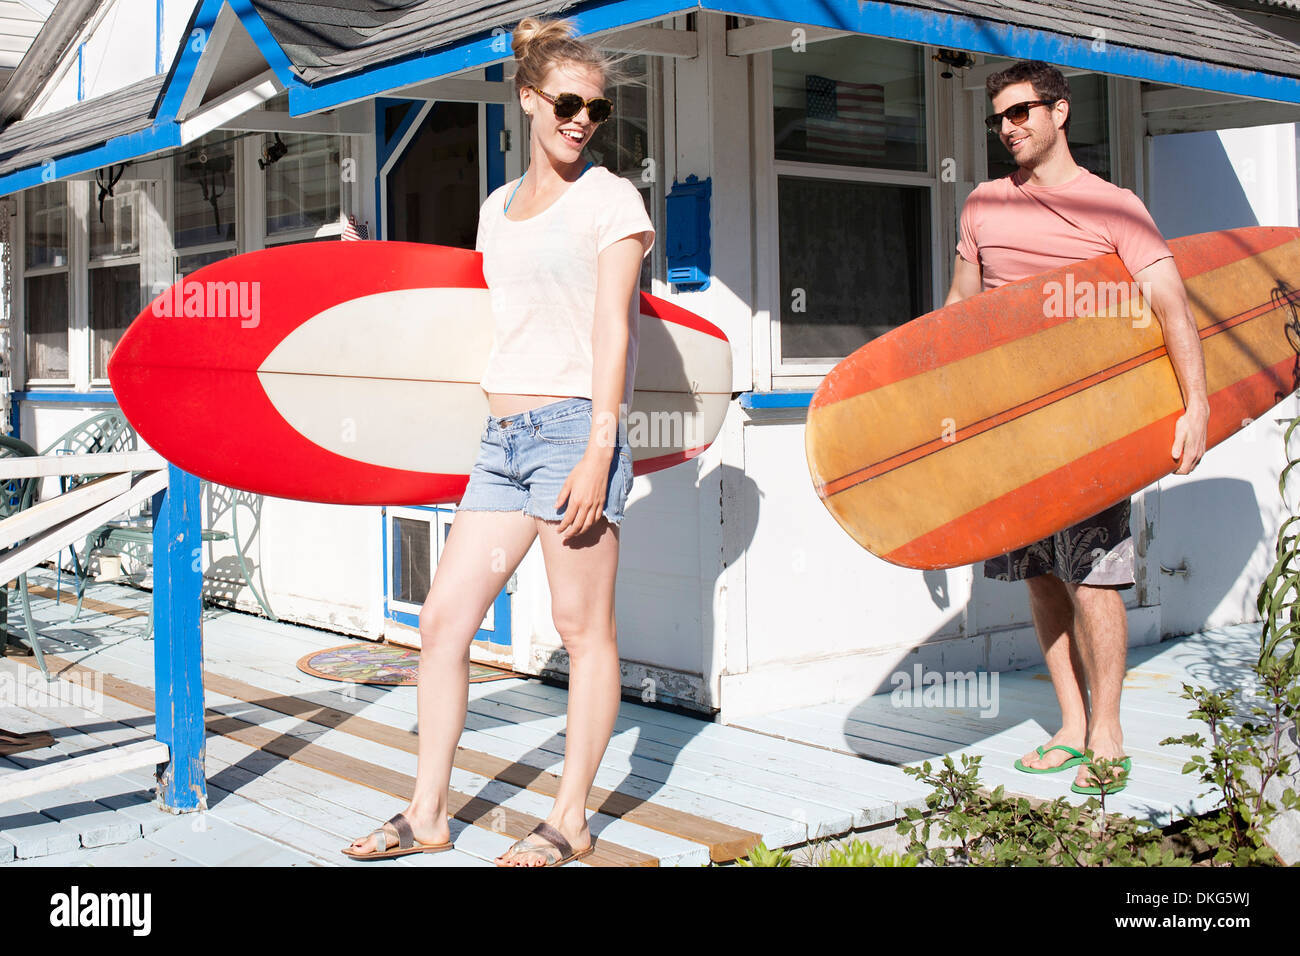 Couple on patio carrying surfboards, Breezy Point, Queens, New York, USA Stock Photo